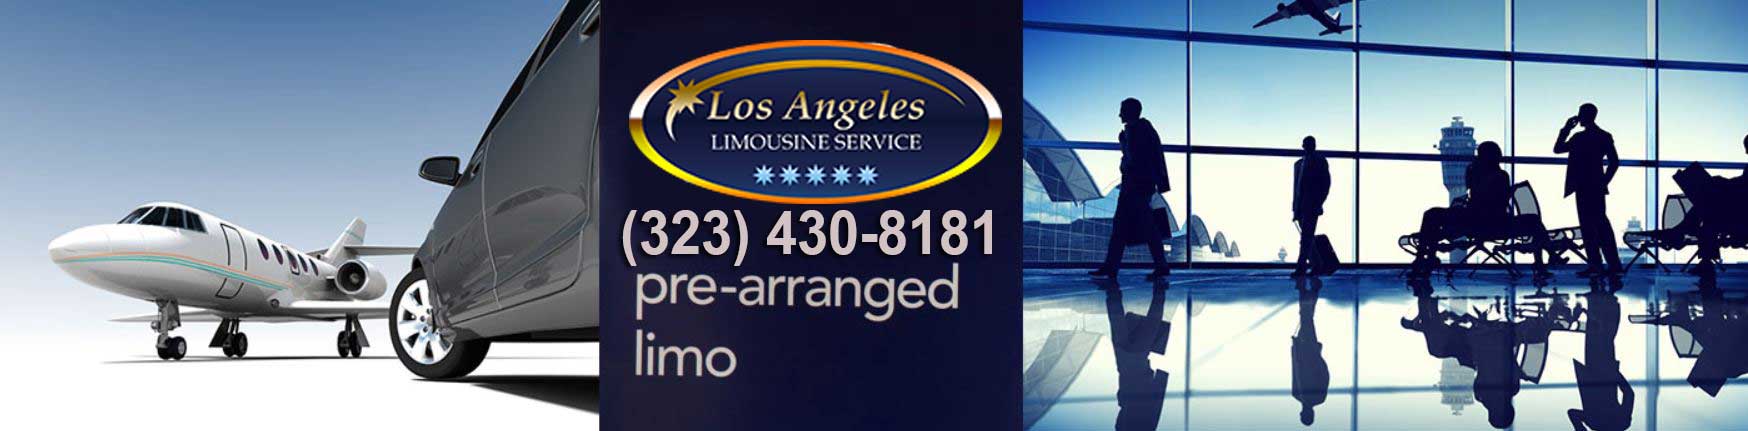 Los Angeles Bachelor or Bachelorette party limo rental services